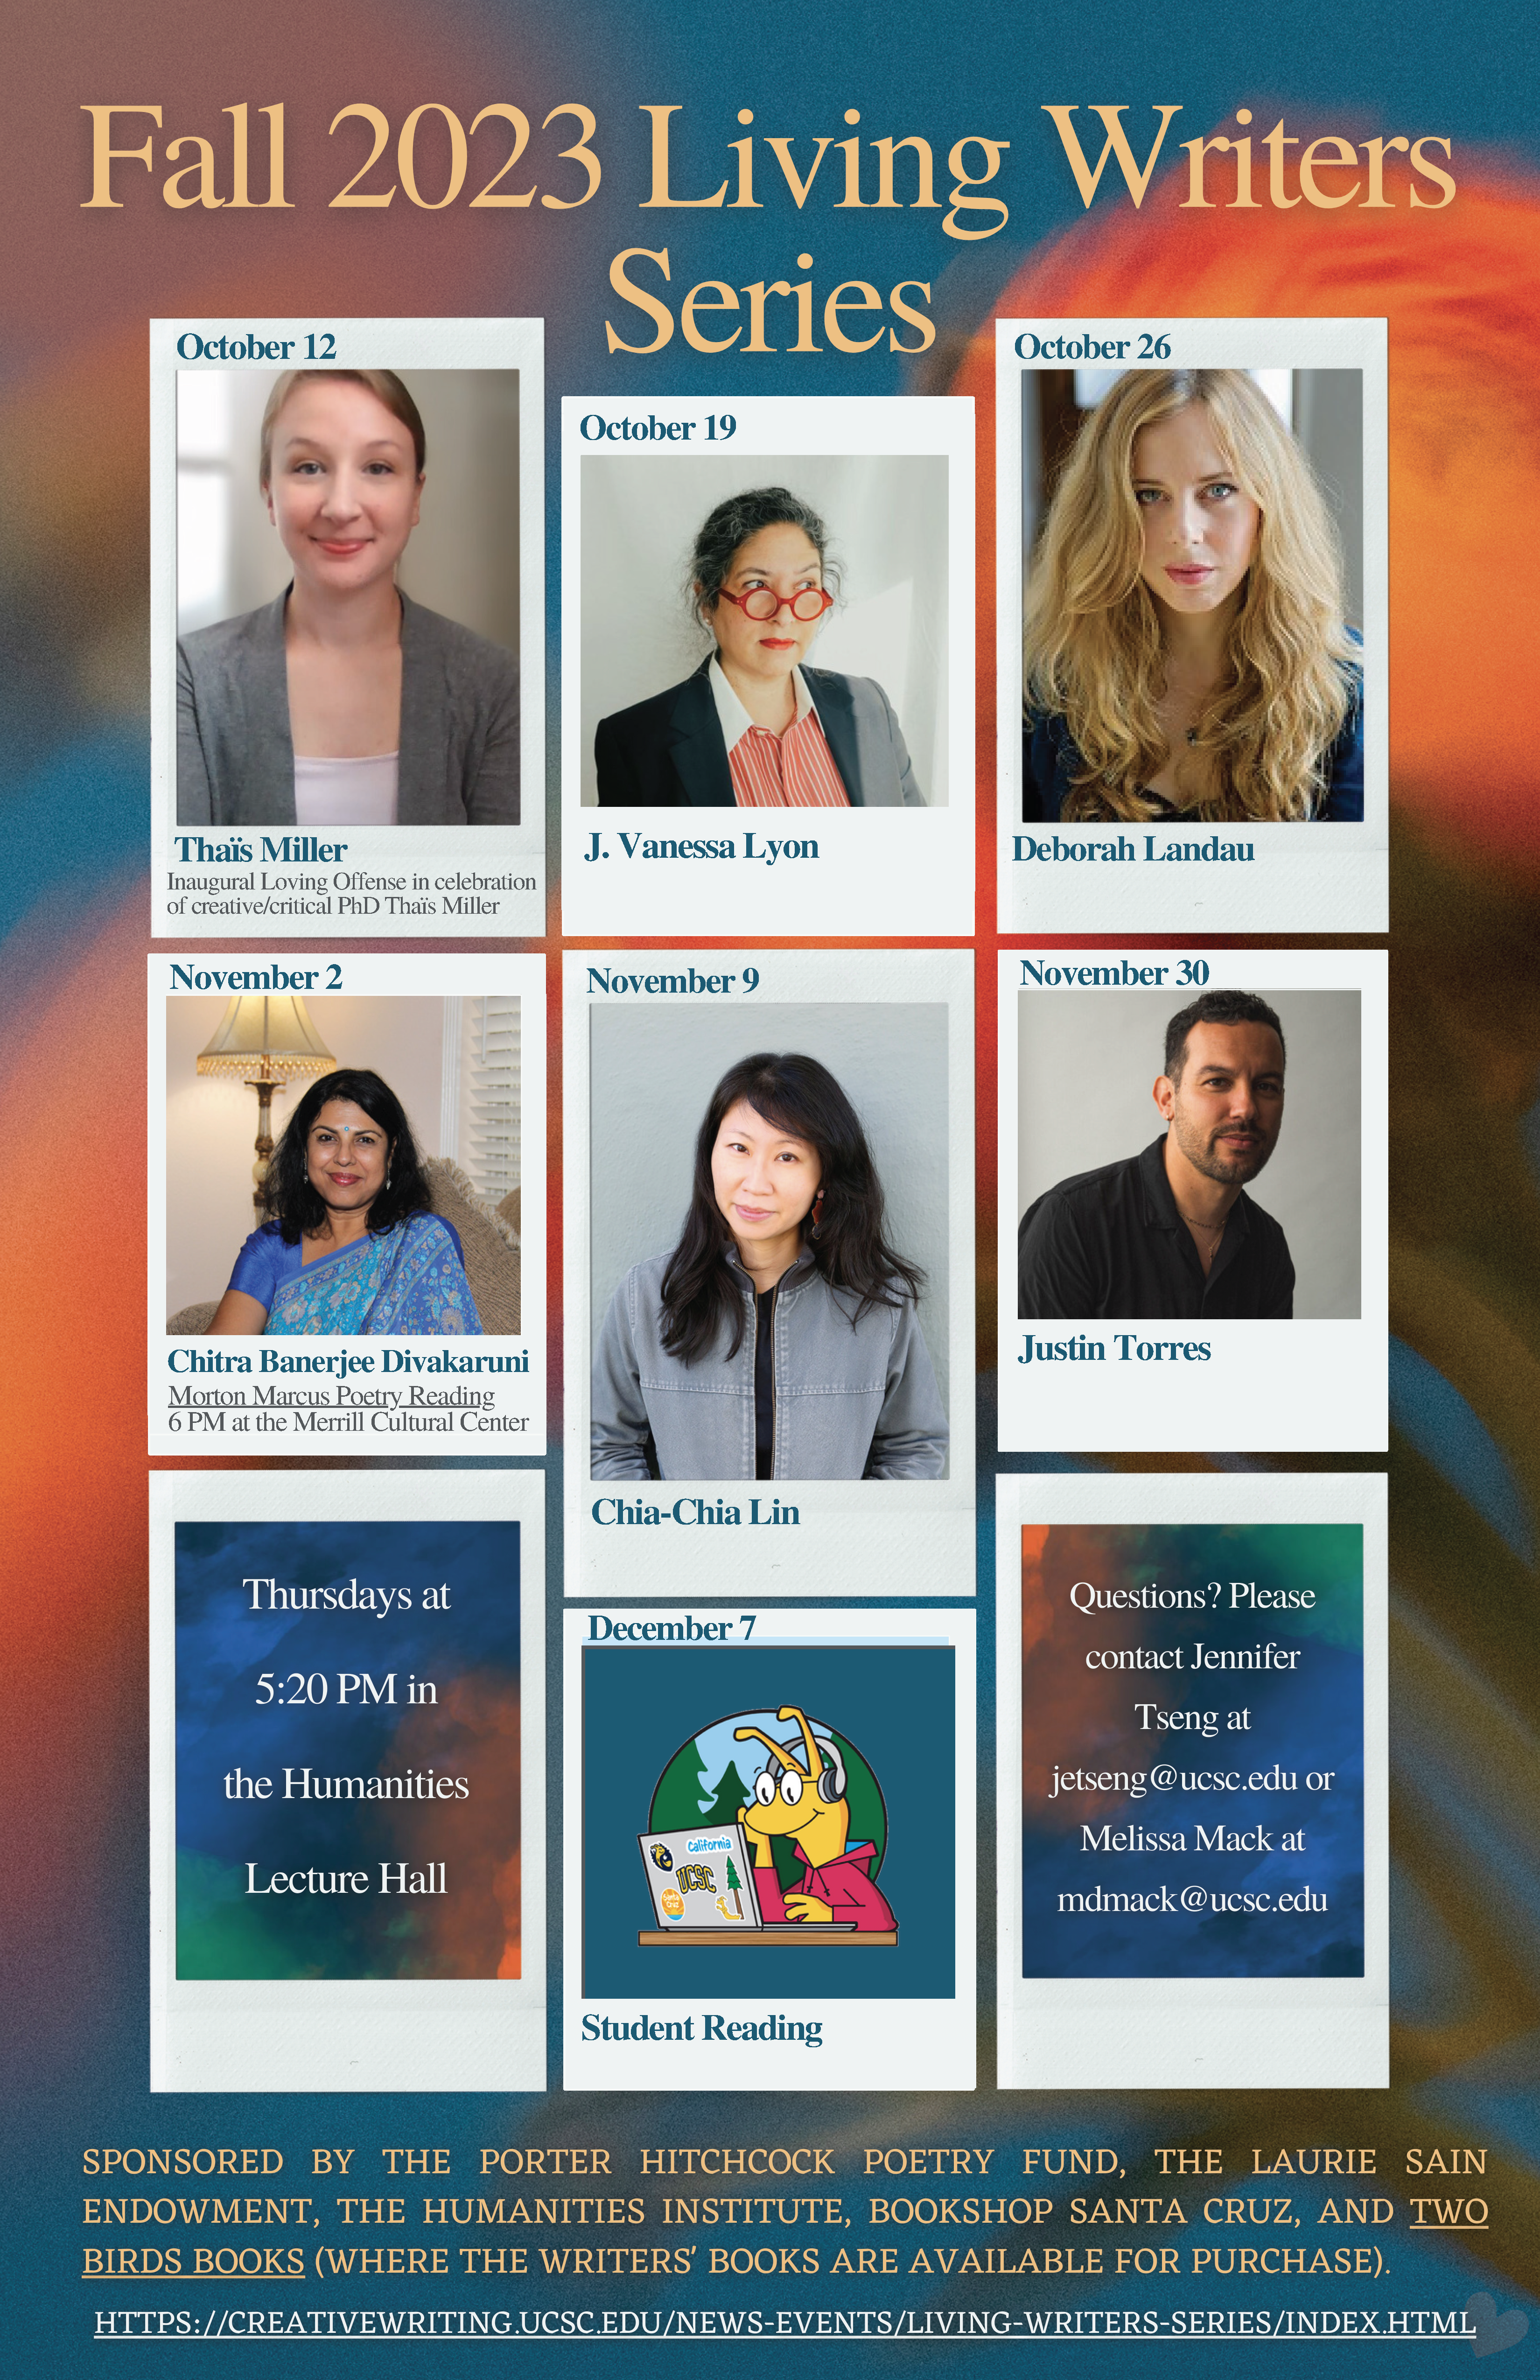 Poster announcing Fall 2023 Living Writers Series and individual readers and dates of readings.